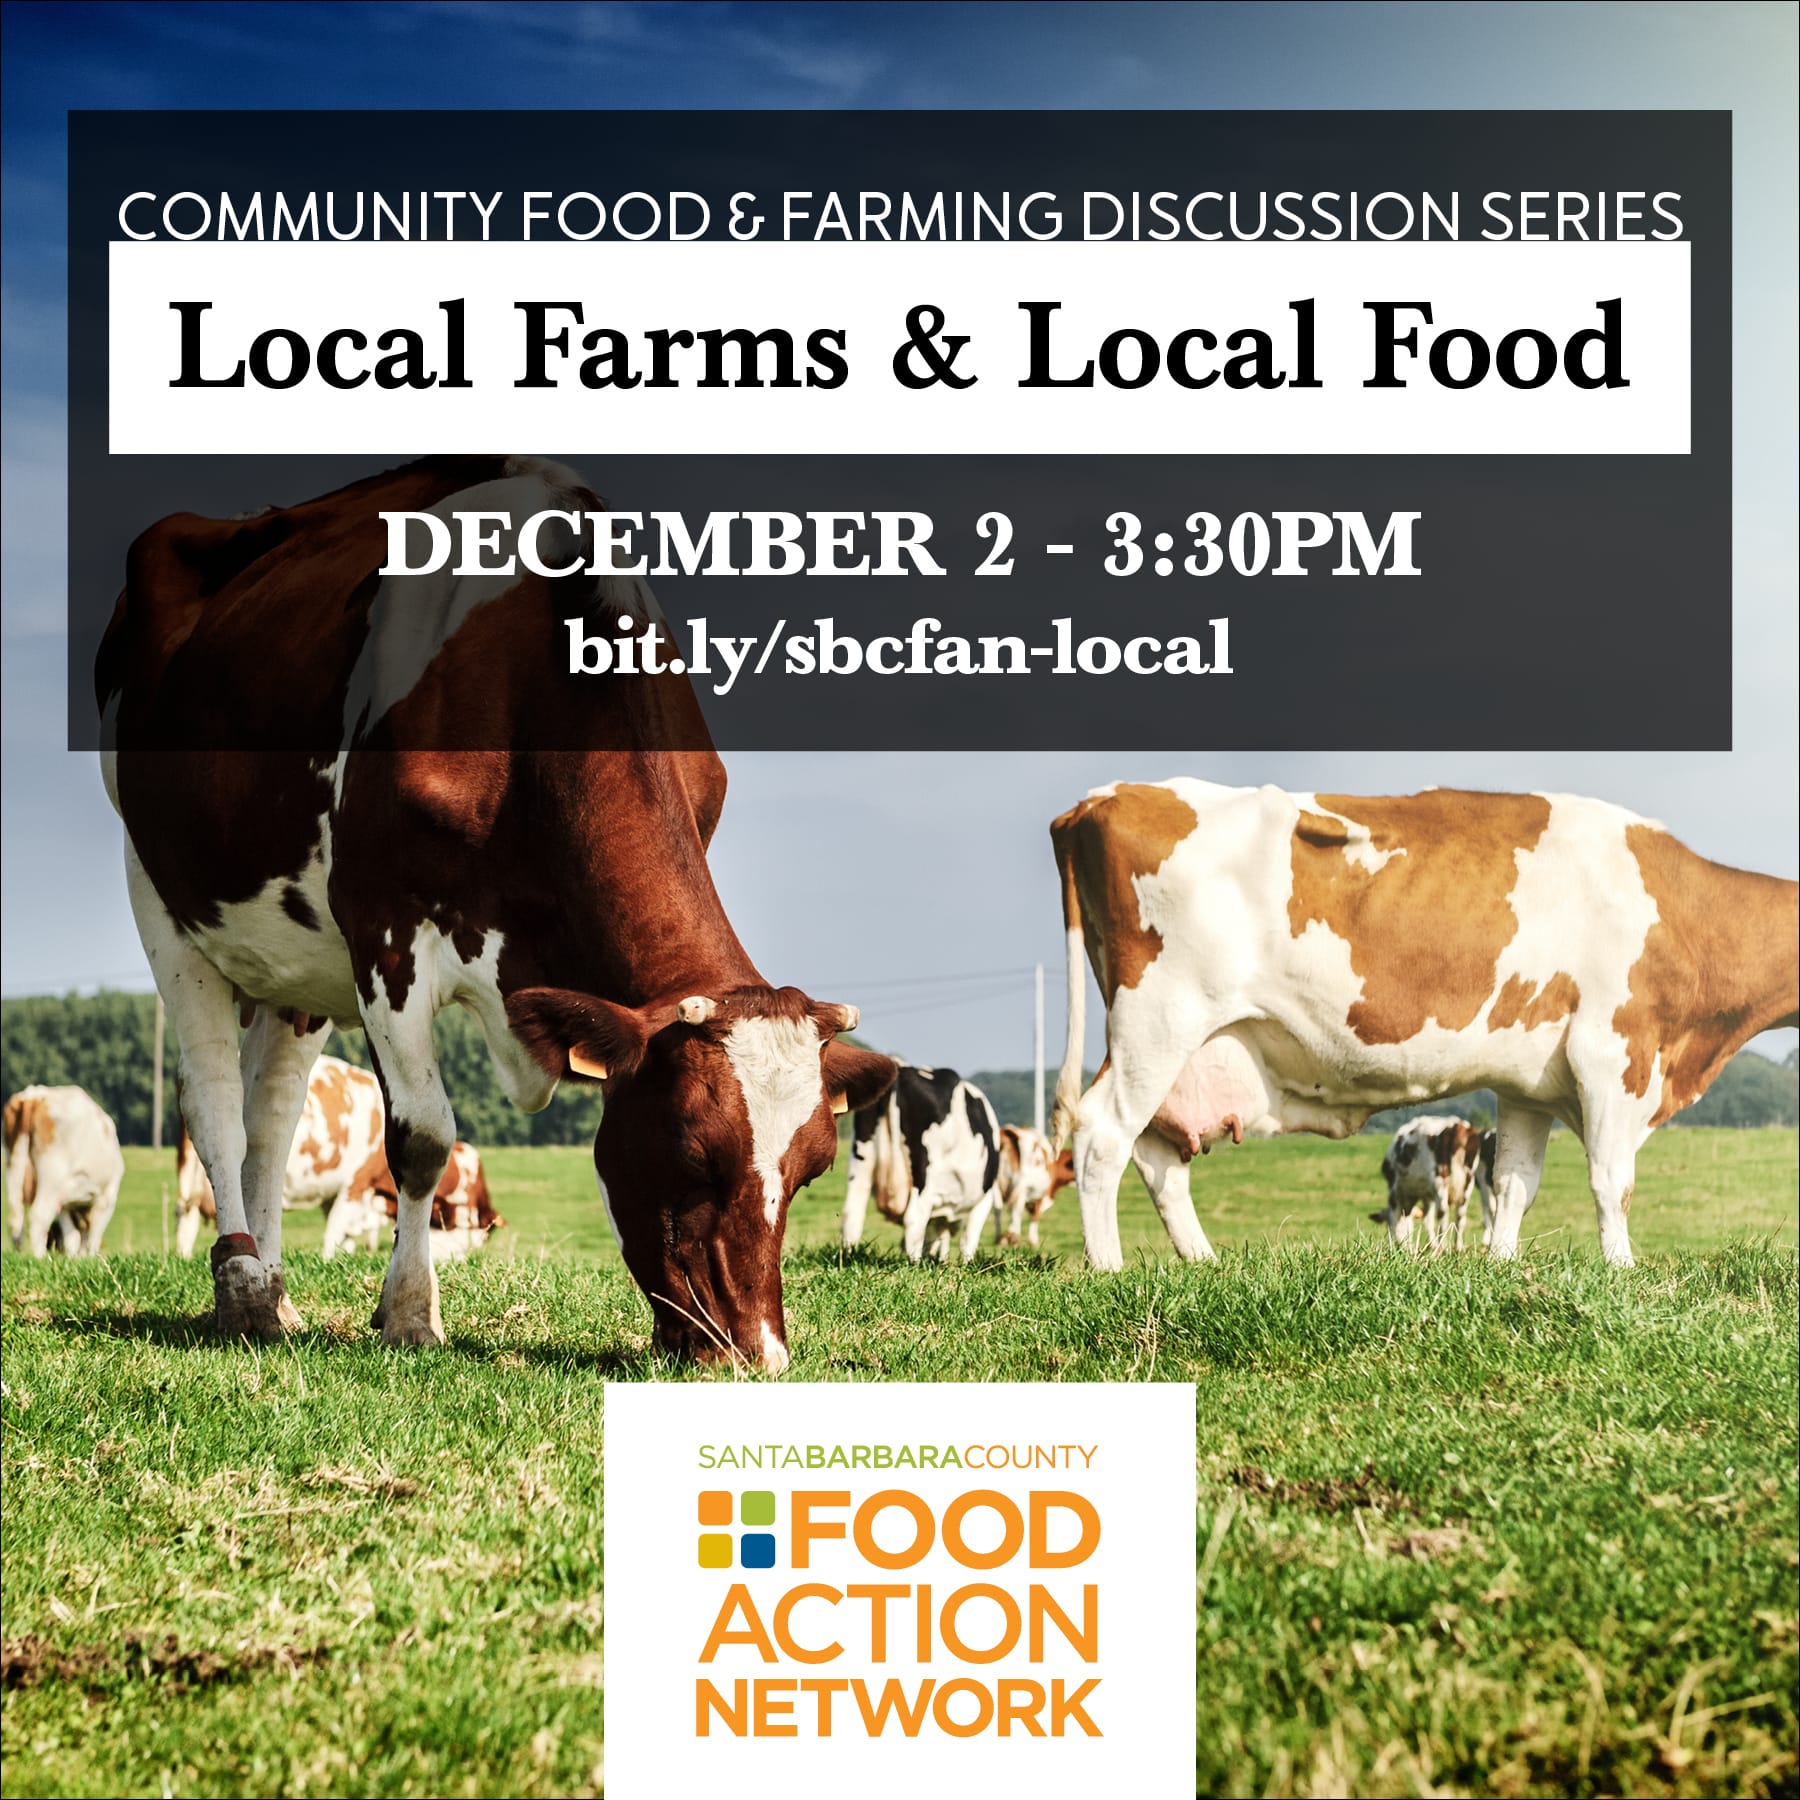 Community Food & Farming Discussion Series: Local Farms & Local Food